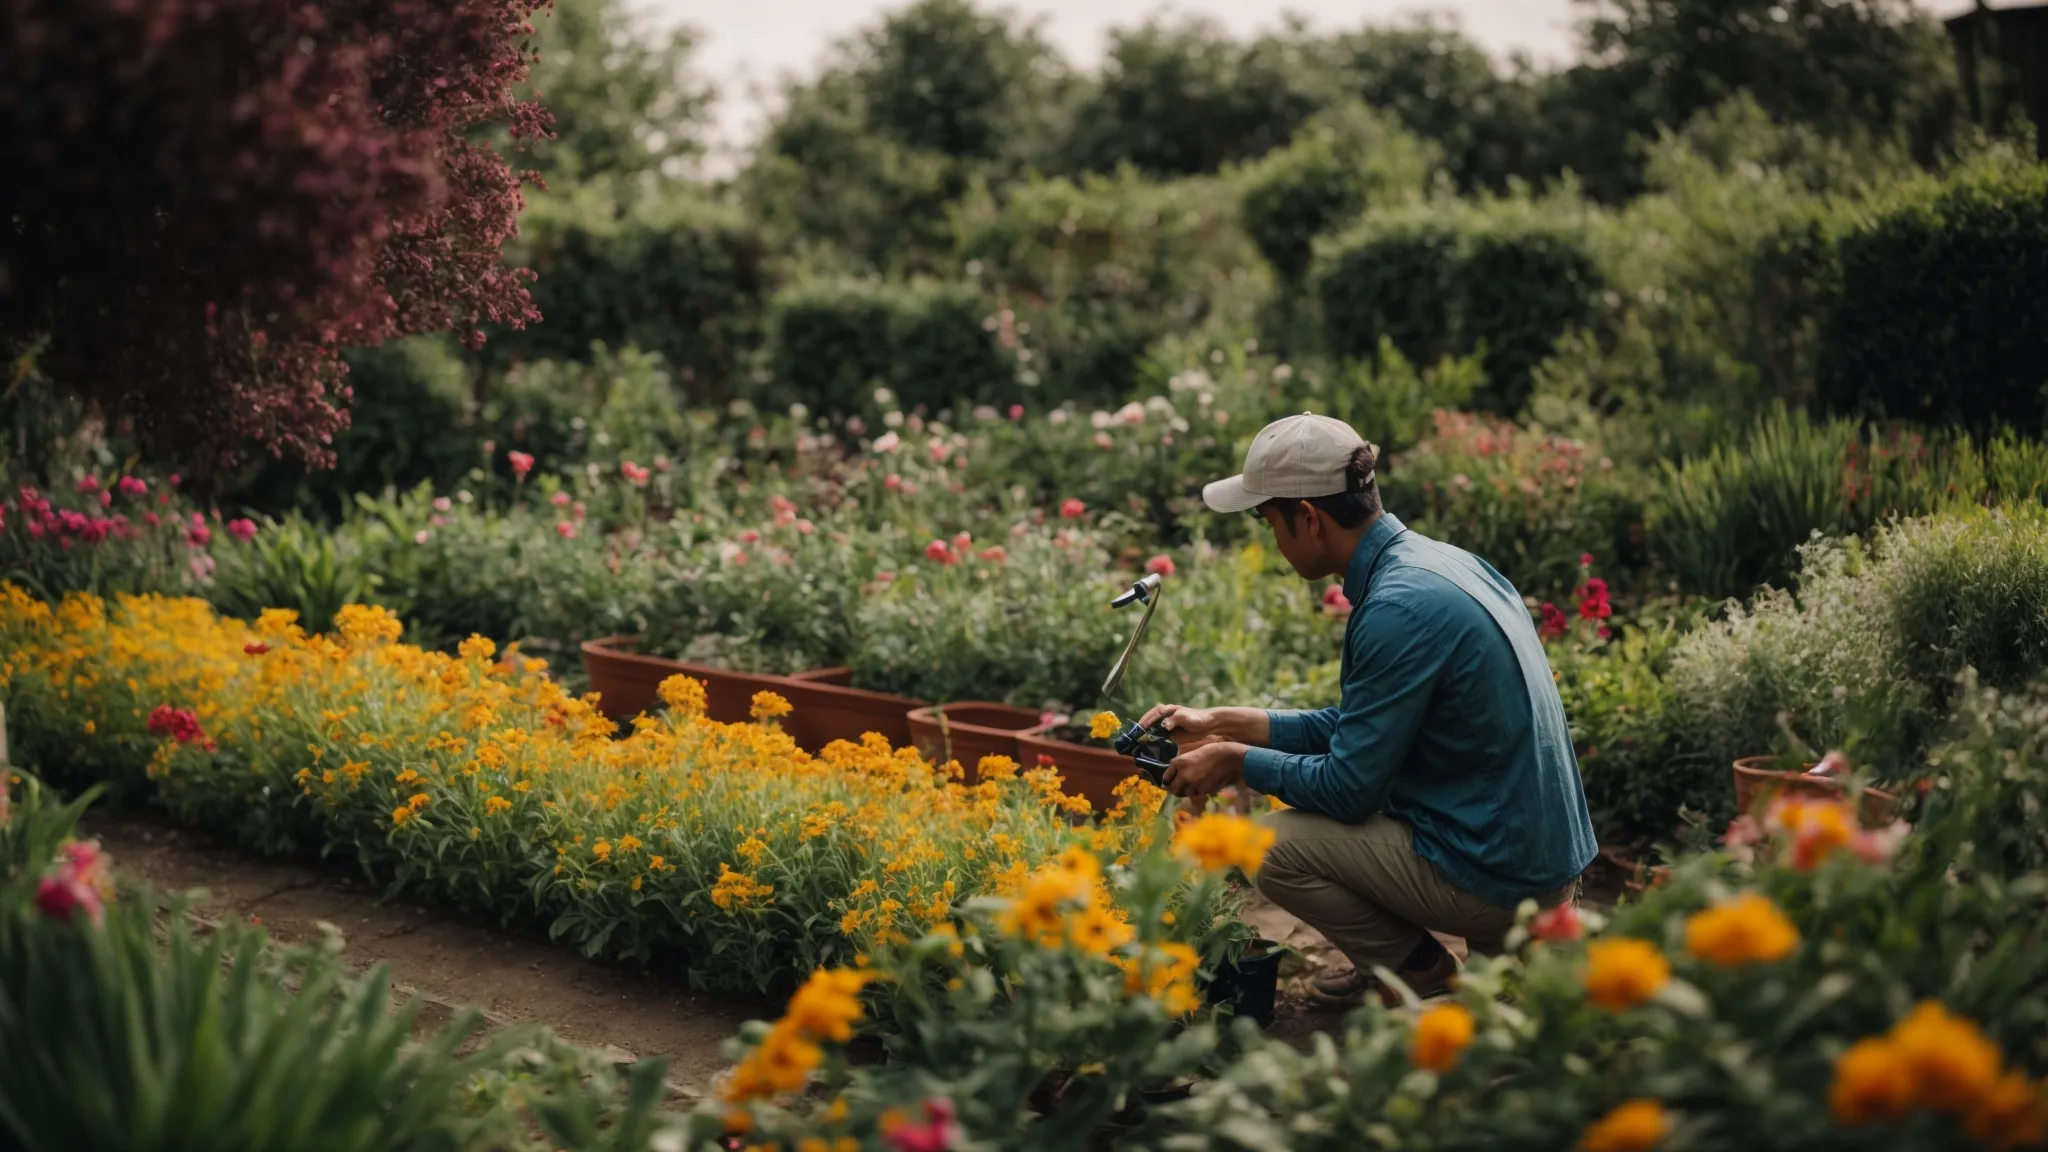 a gardener carefully tends to a vibrant garden, symbolizing the cultivation of engaging content.